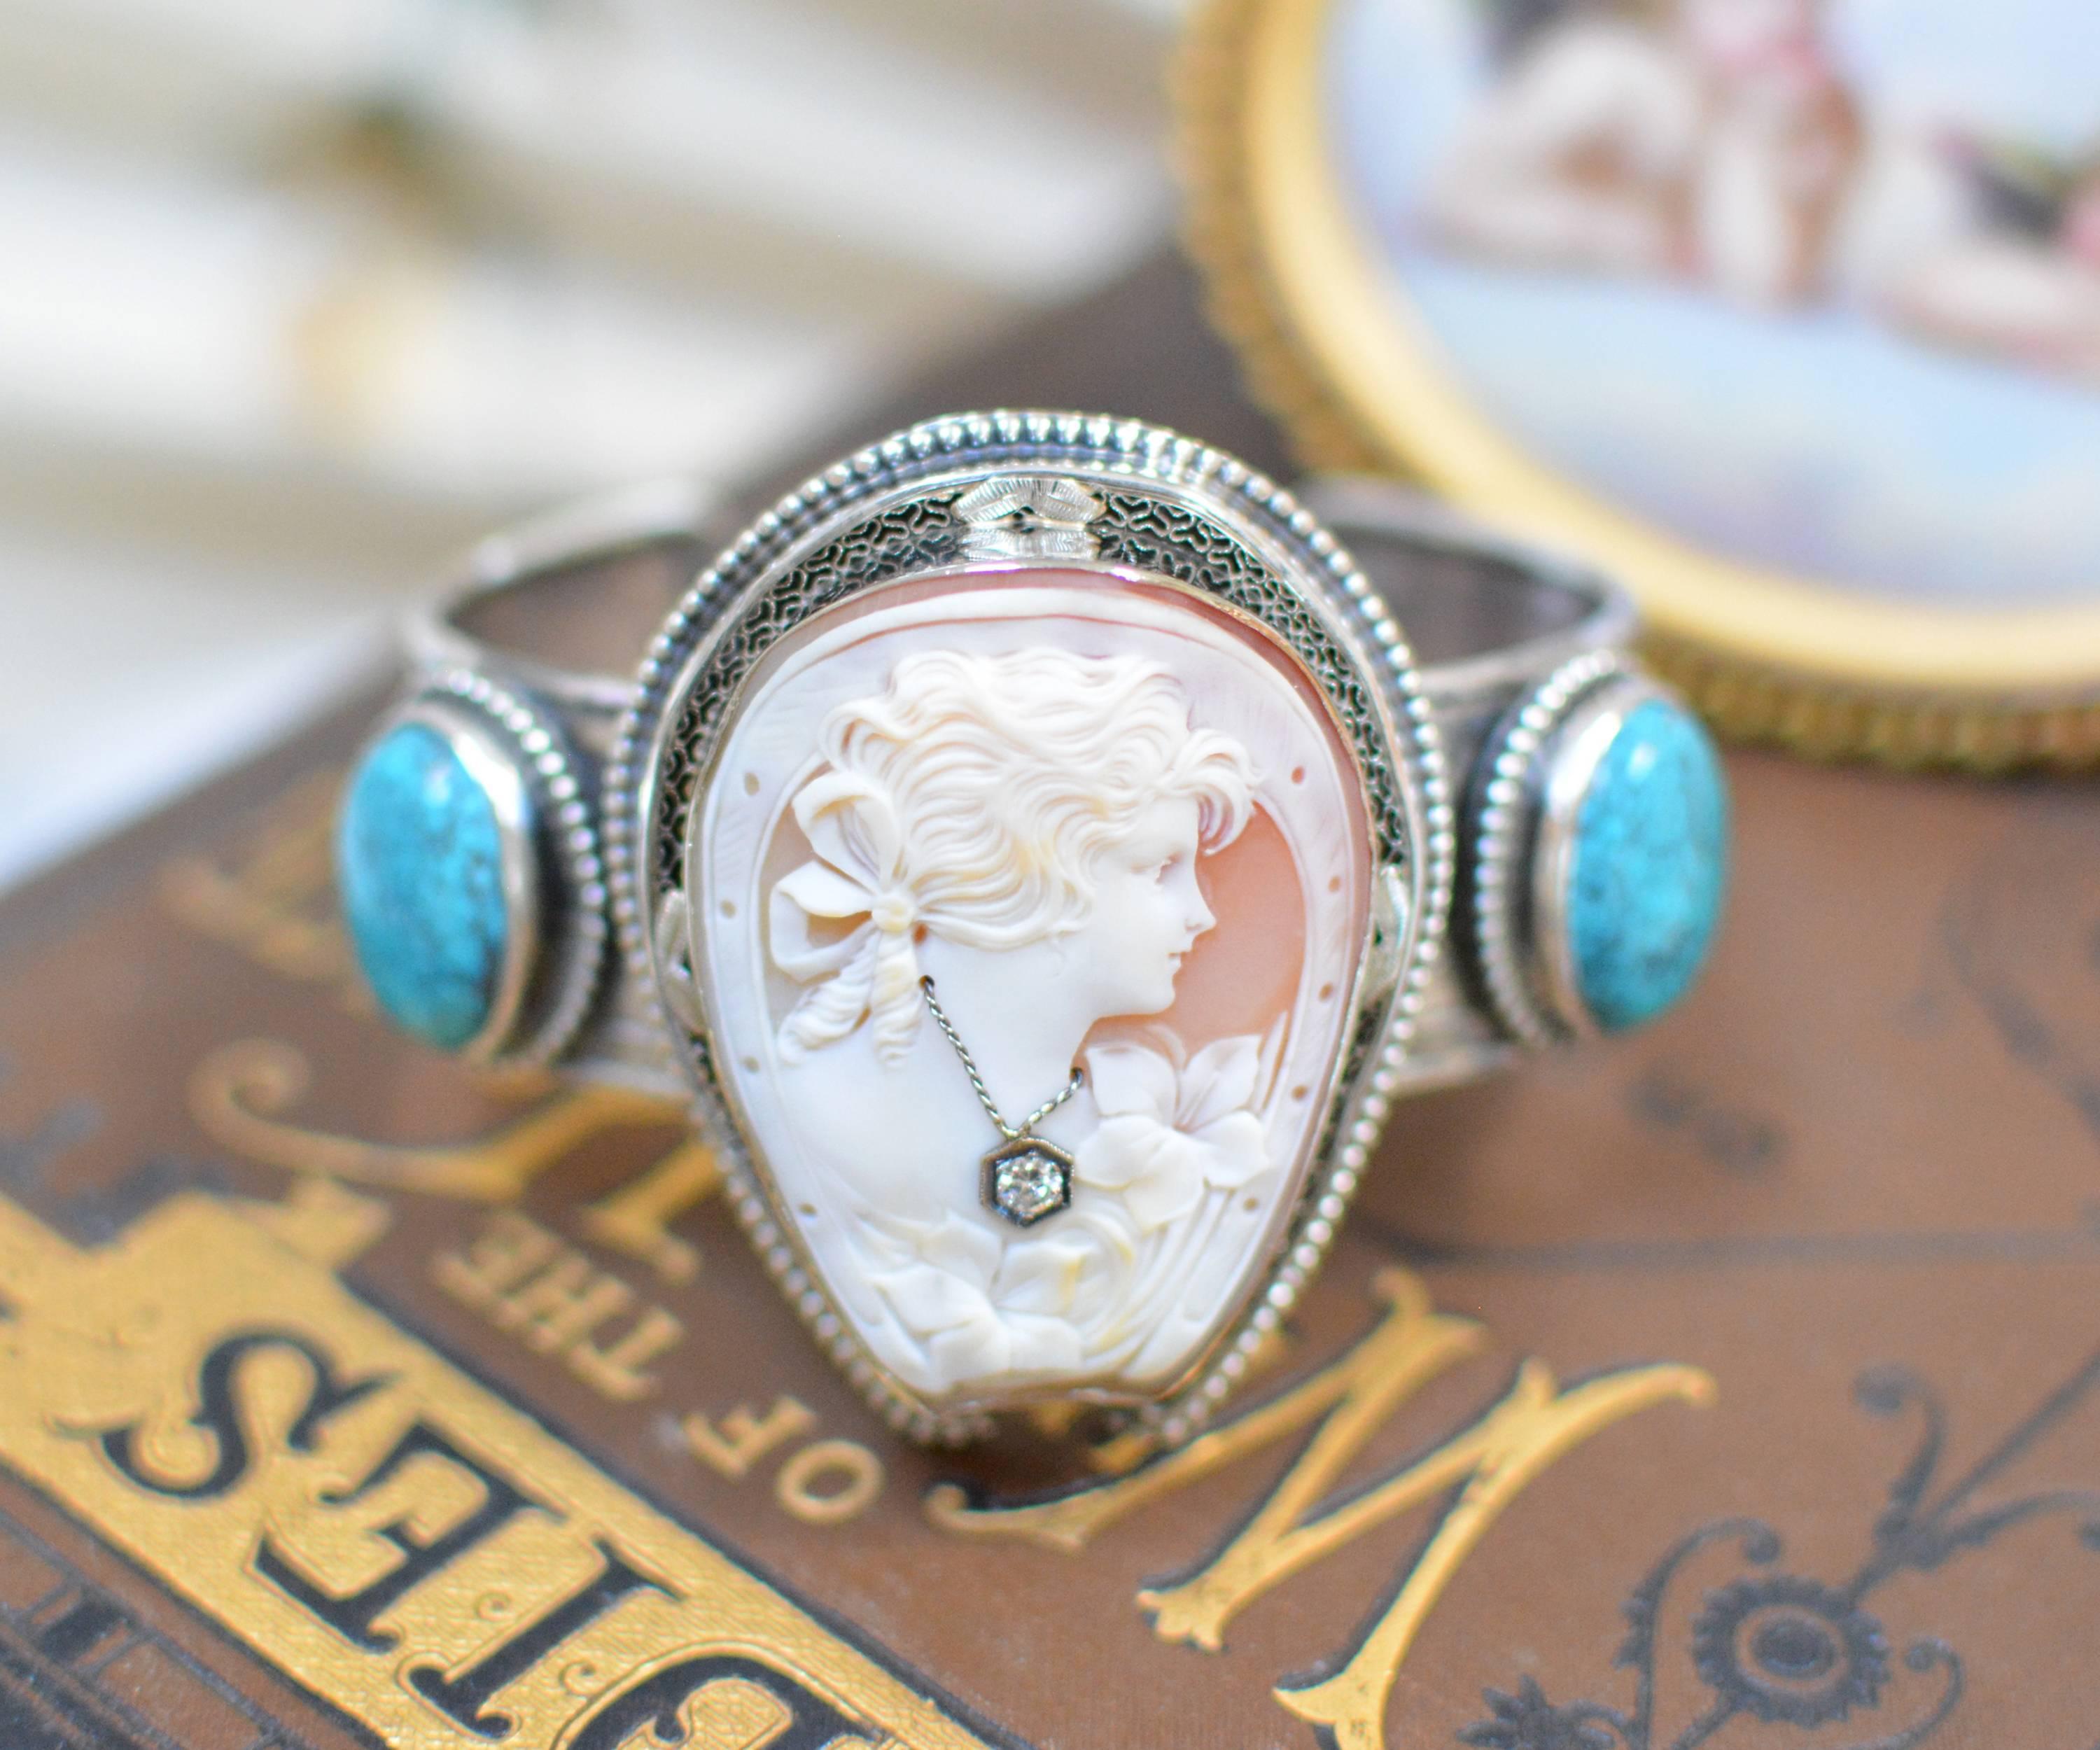 This sterling silver cuff bracelet features an antique period finely hand carved cameo depicting a lovely girl framed within a horseshoe. Wearing a natural diamond necklace, she is mounted in a filigree frame of 14 karat white gold, then edged in